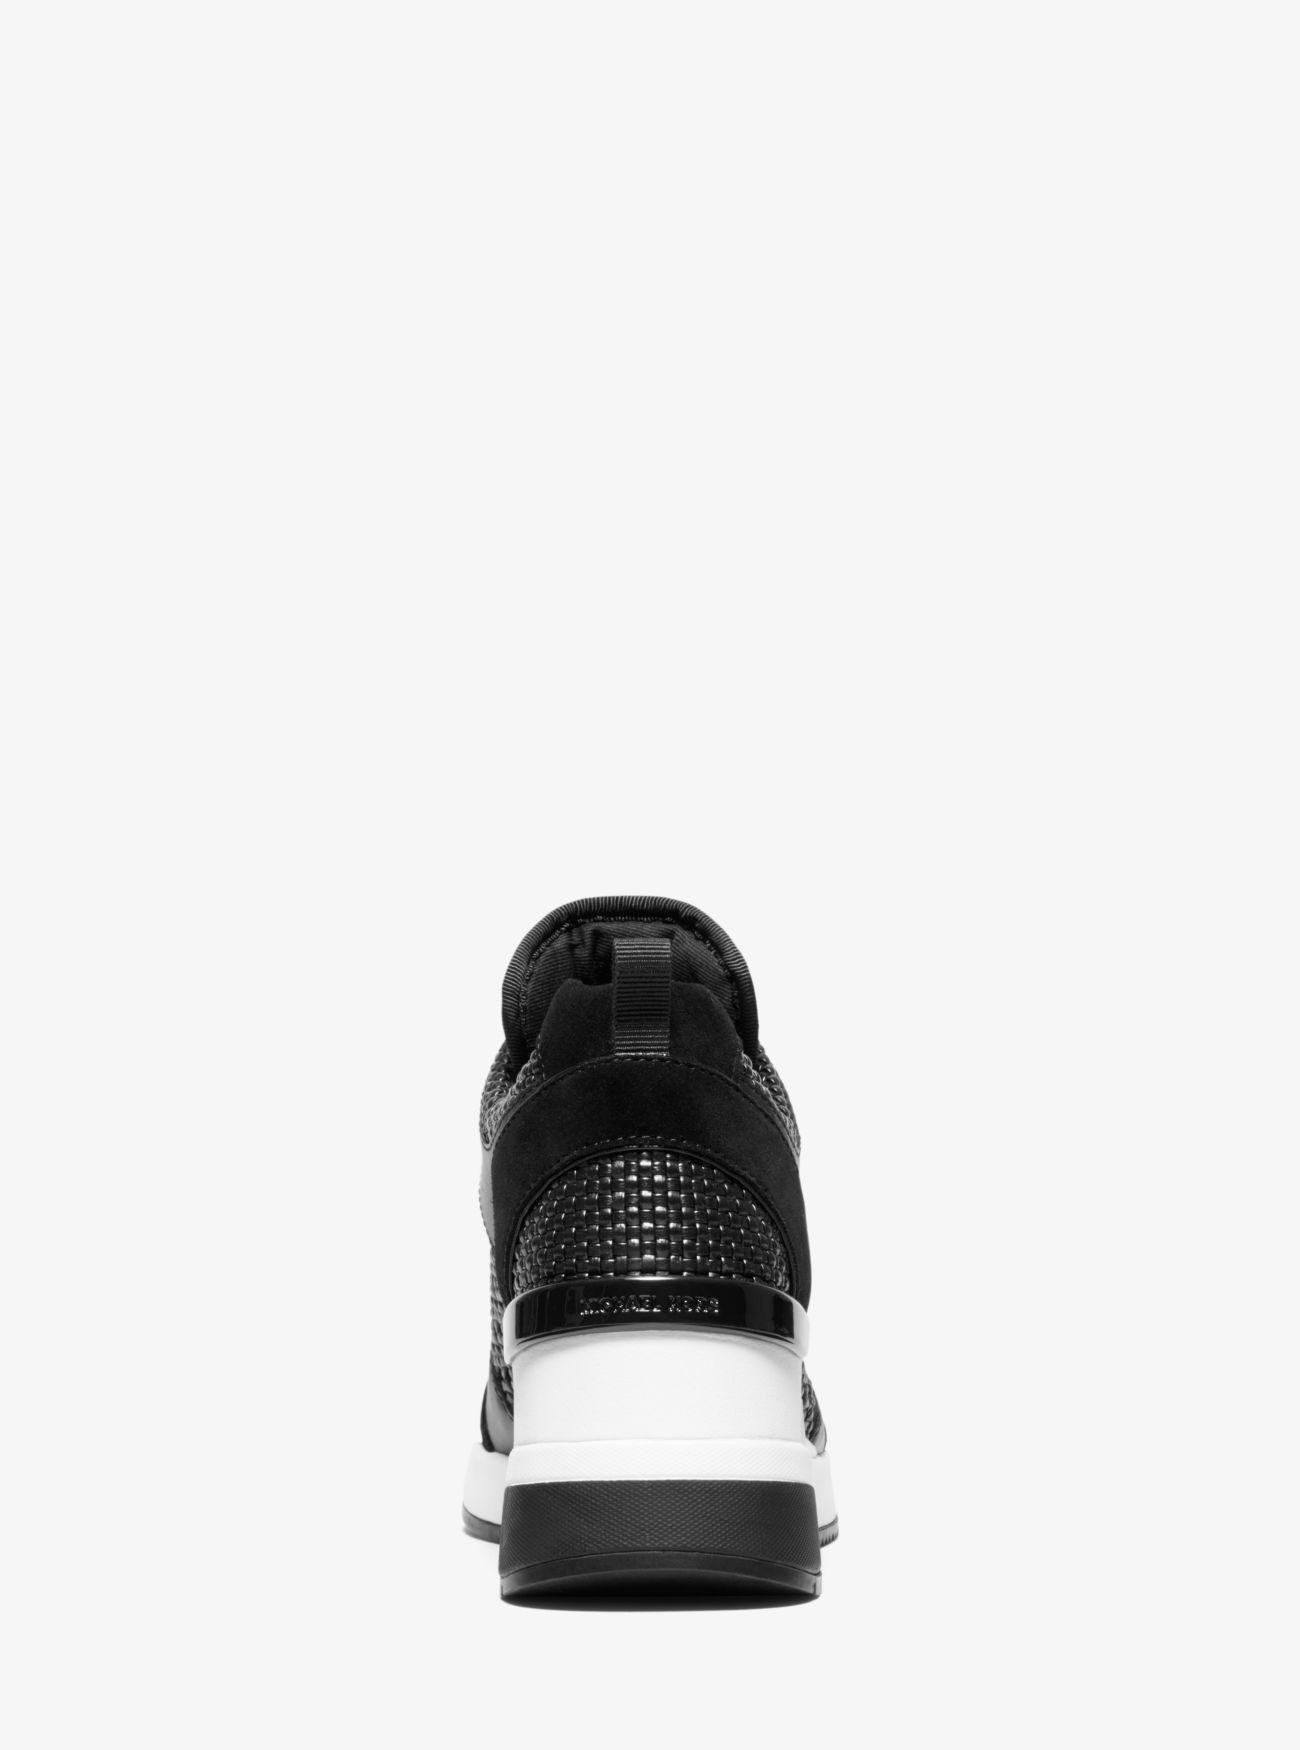 Michael Kors Georgie Woven Leather Trainer in Black | Lyst